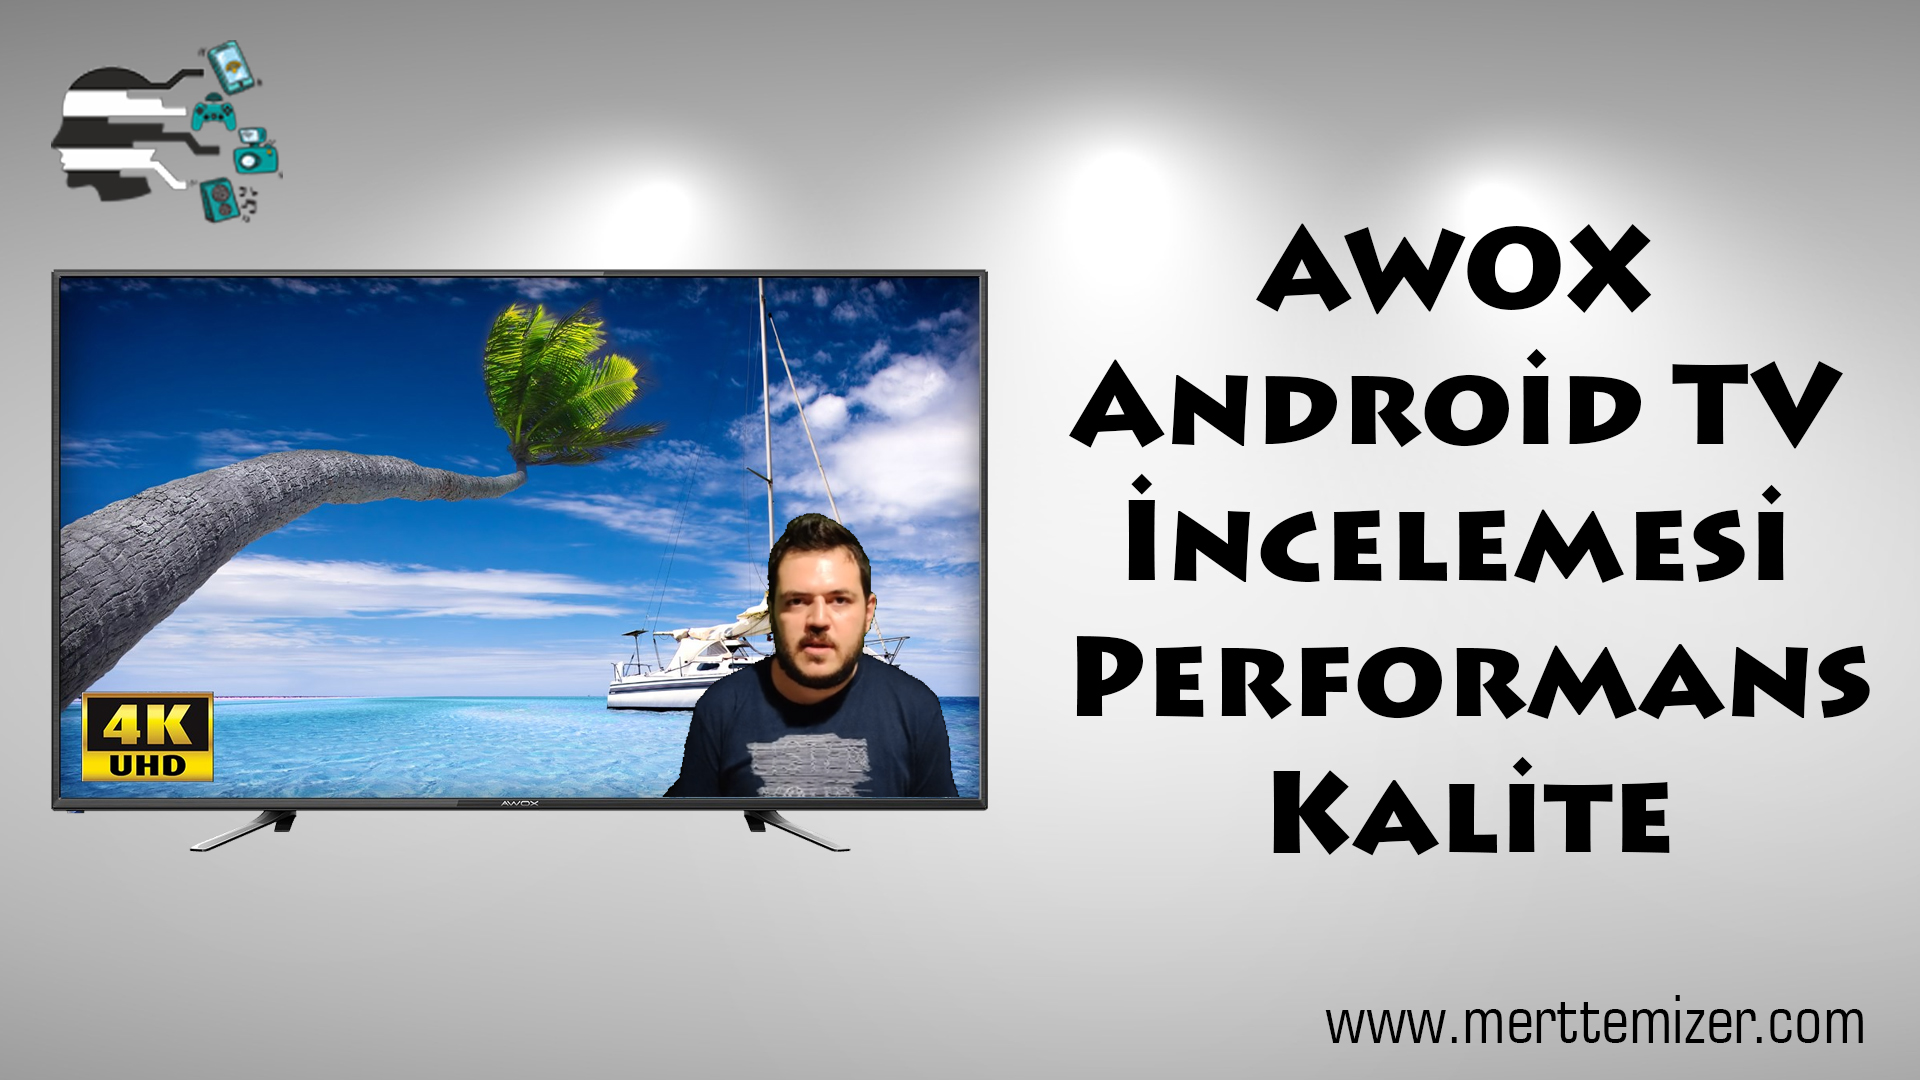 Awox Android TV İncelemesi, Performans, Kalite